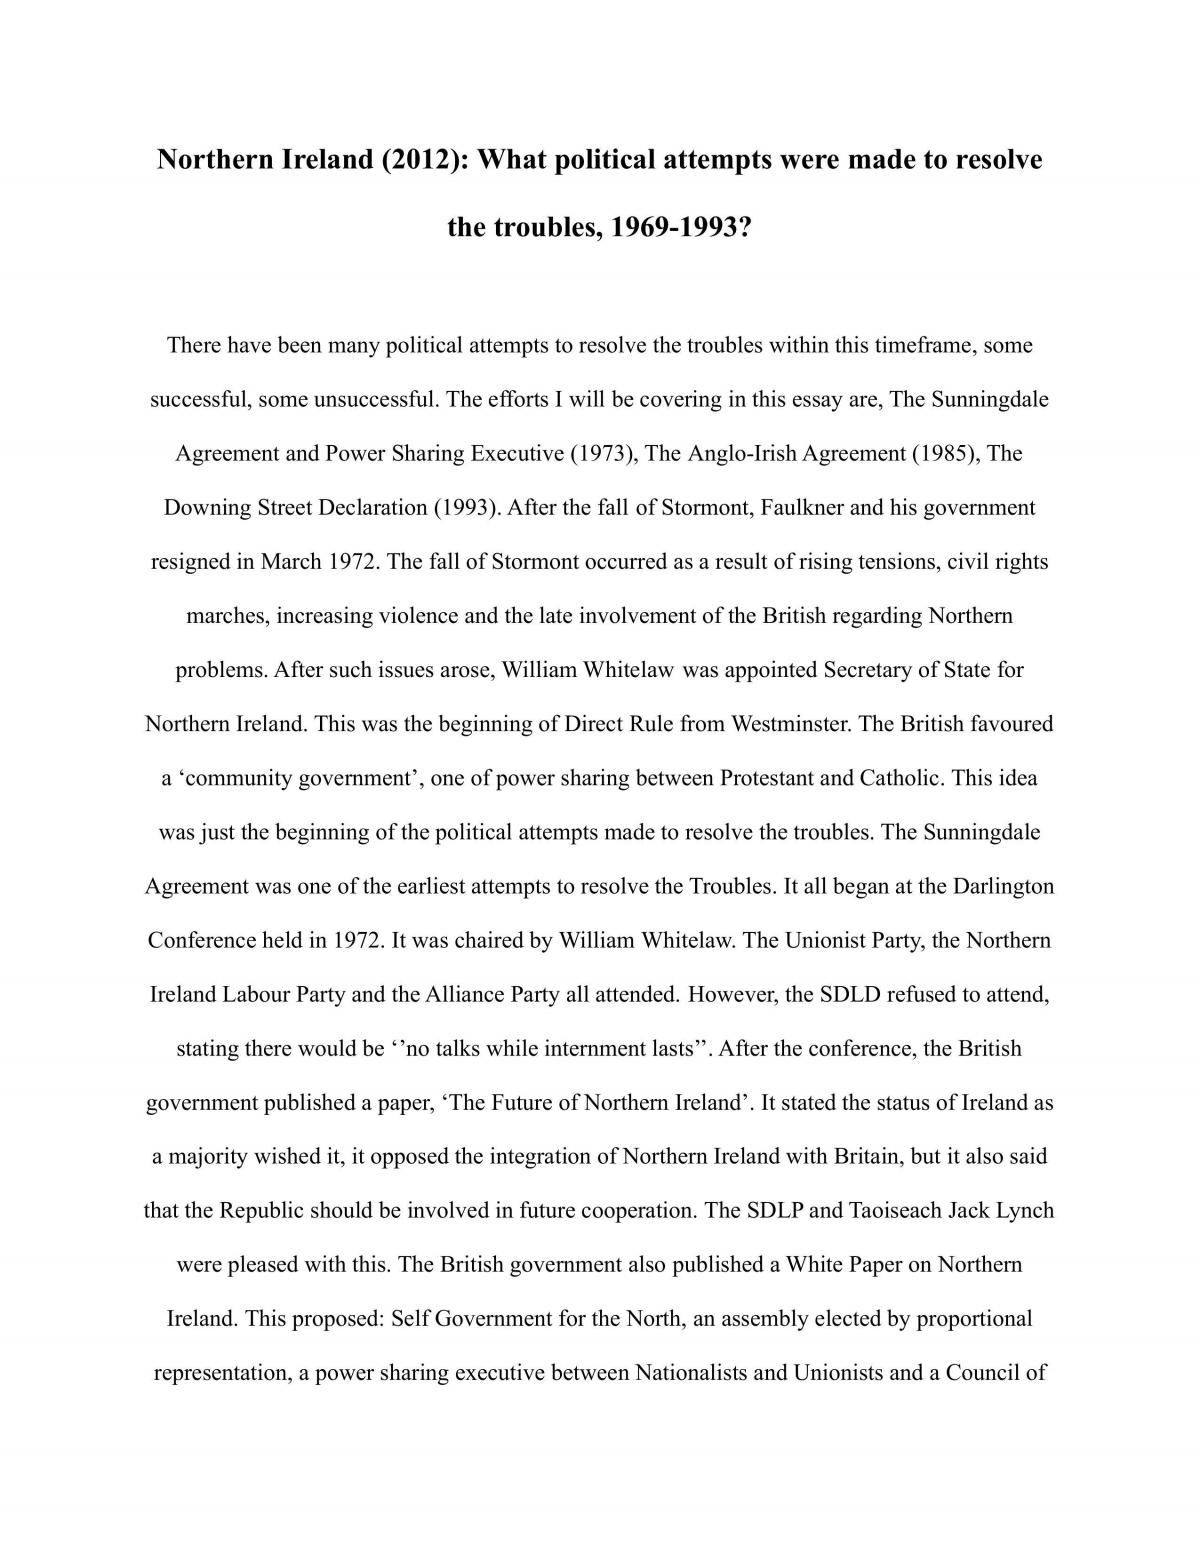 Northern Ireland (2012): What political attempts were made to resolve the troubles, 1969-1993?  - Page 1